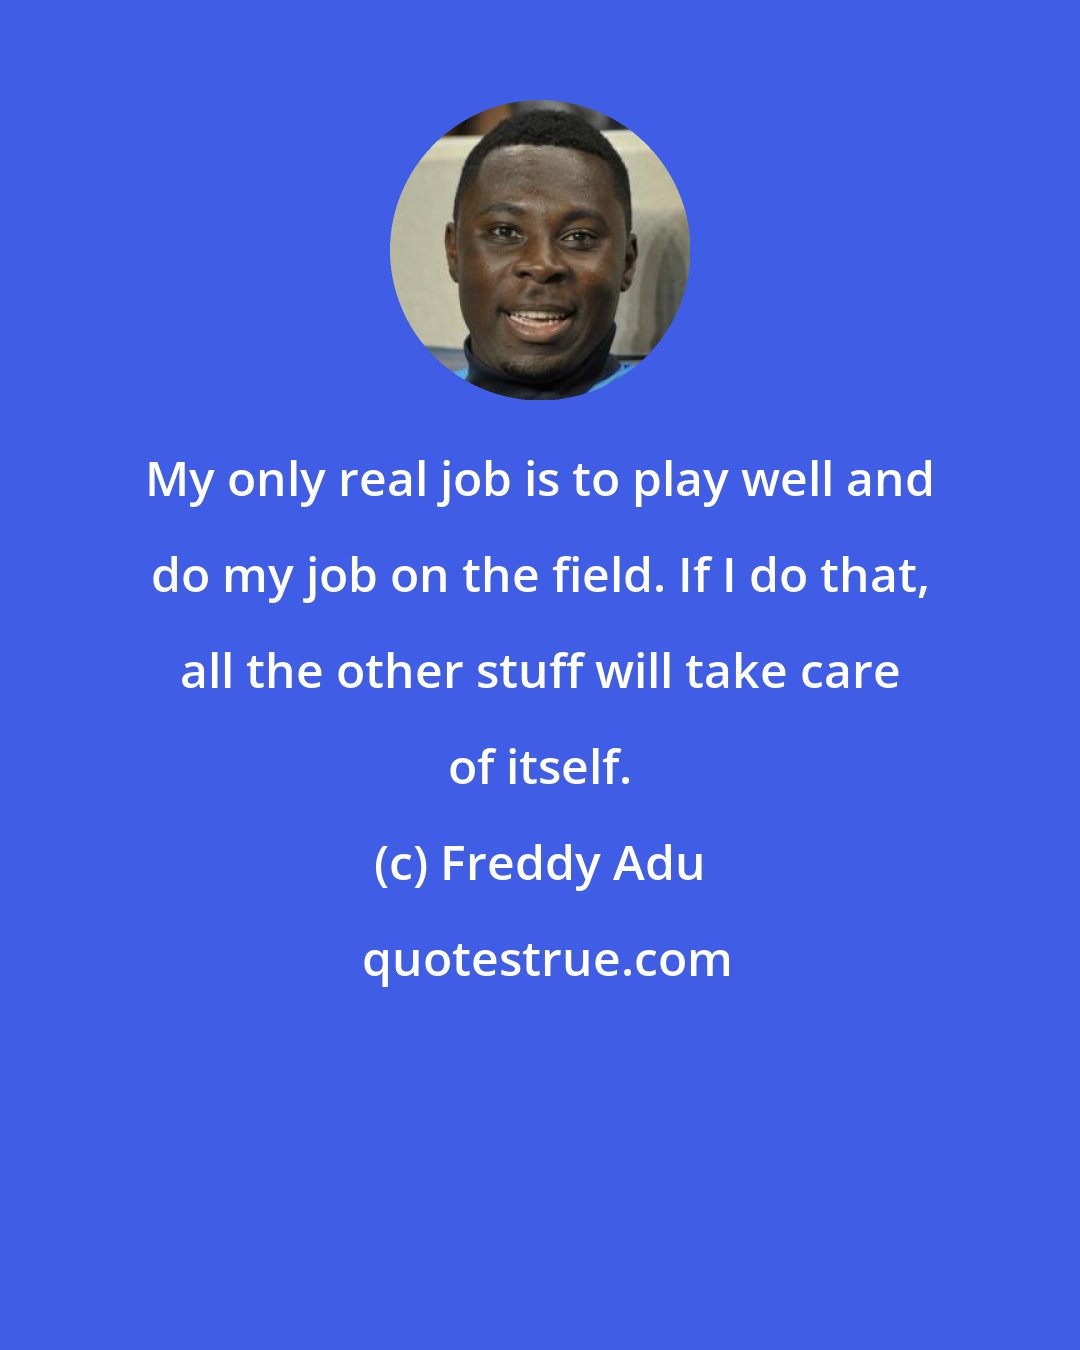 Freddy Adu: My only real job is to play well and do my job on the field. If I do that, all the other stuff will take care of itself.